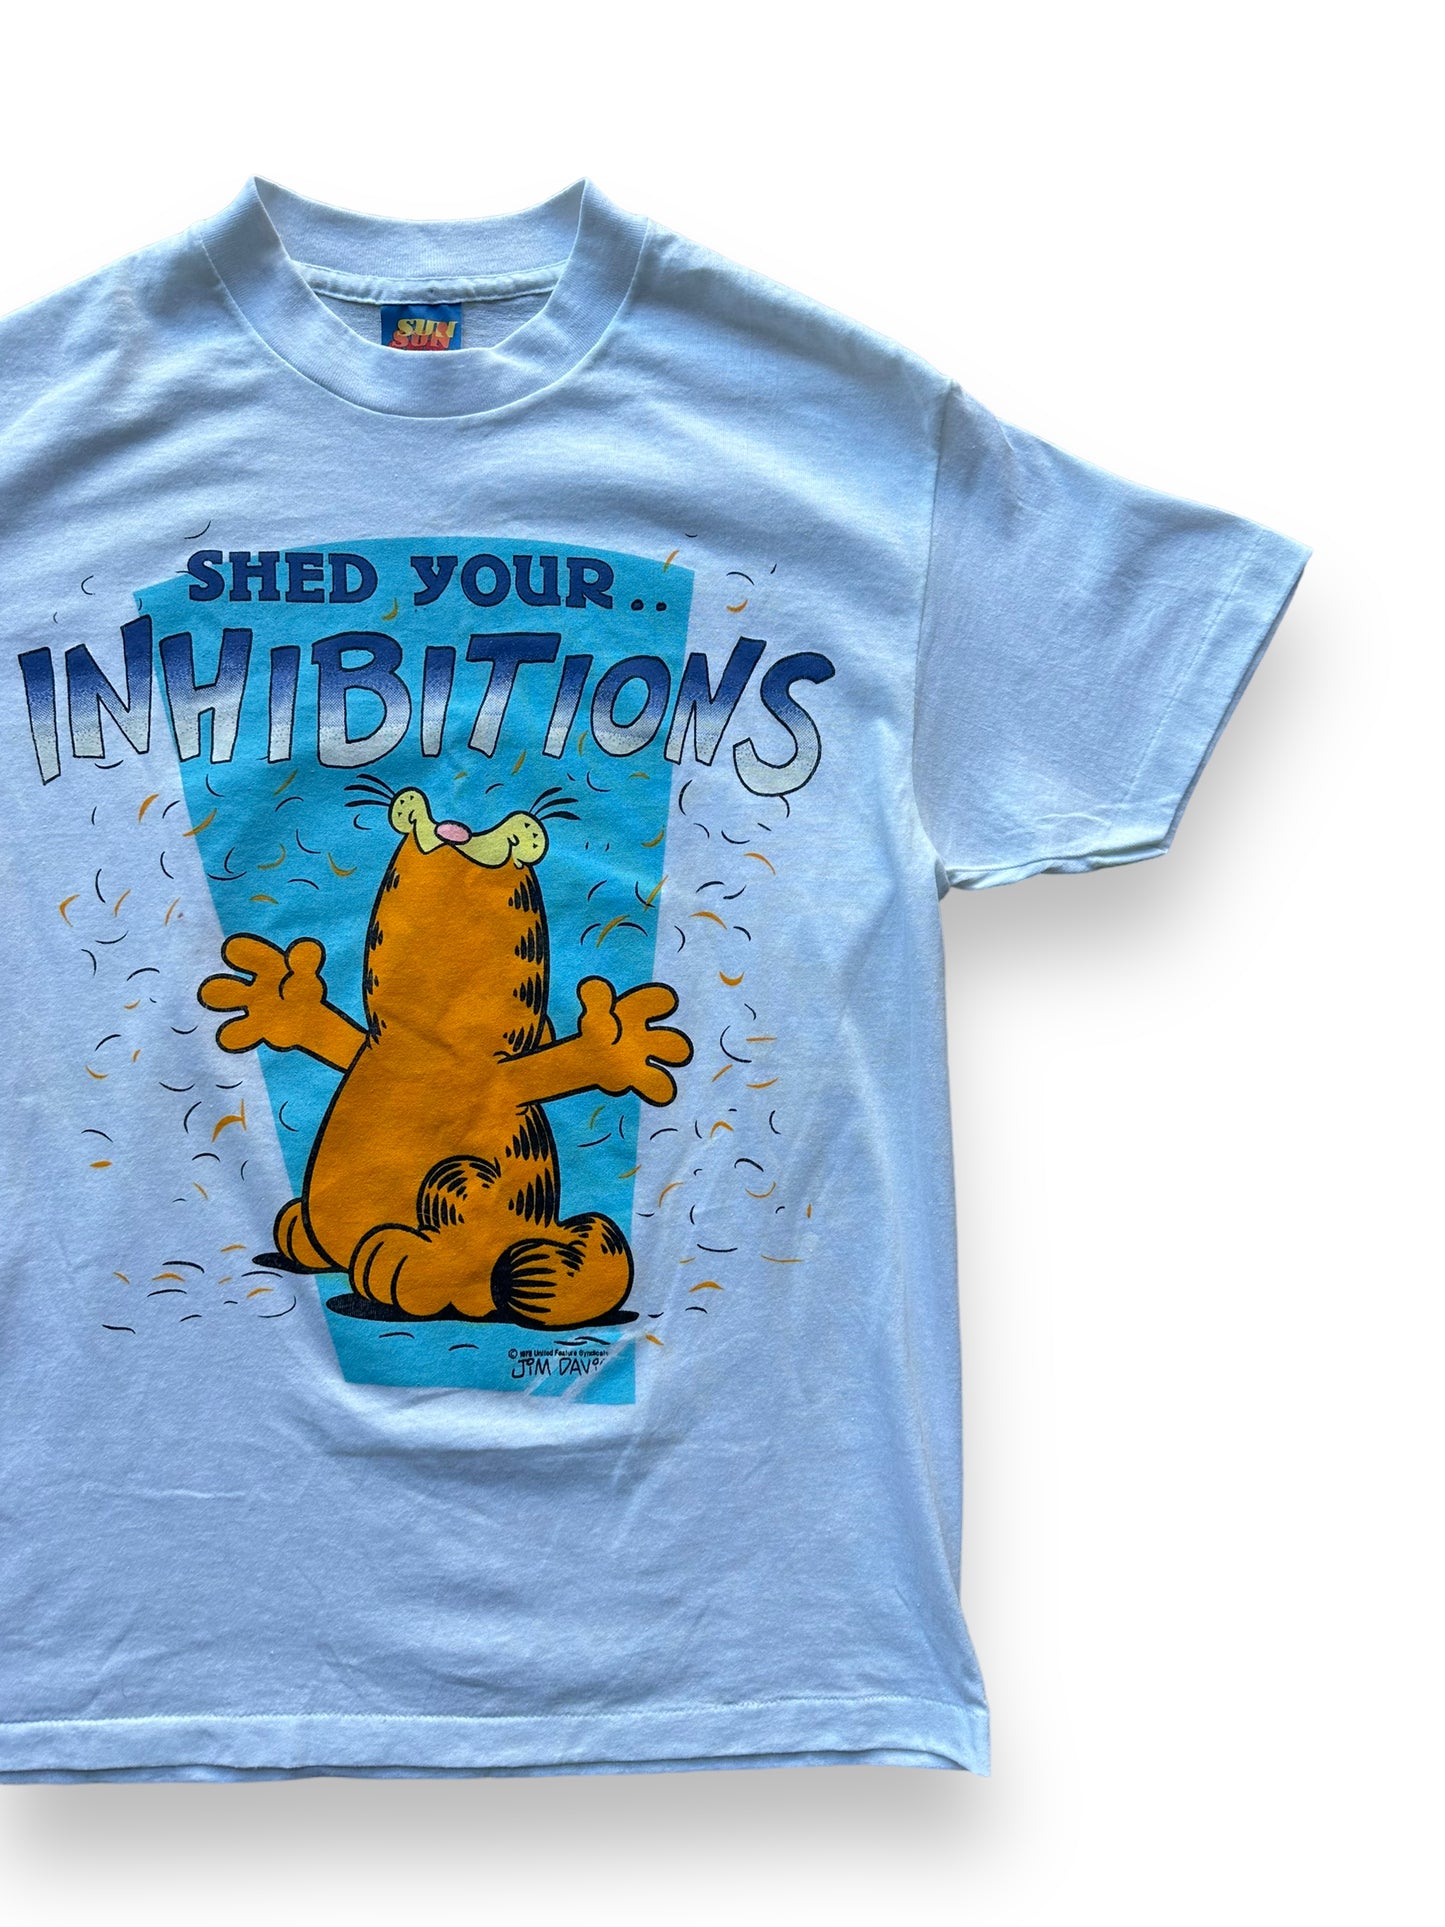 Front left of Vintage Garfield "Shed Your Inhibitions" Tee SZ M |  Vintage Cat Tee Seattle | Barn Owl Vintage